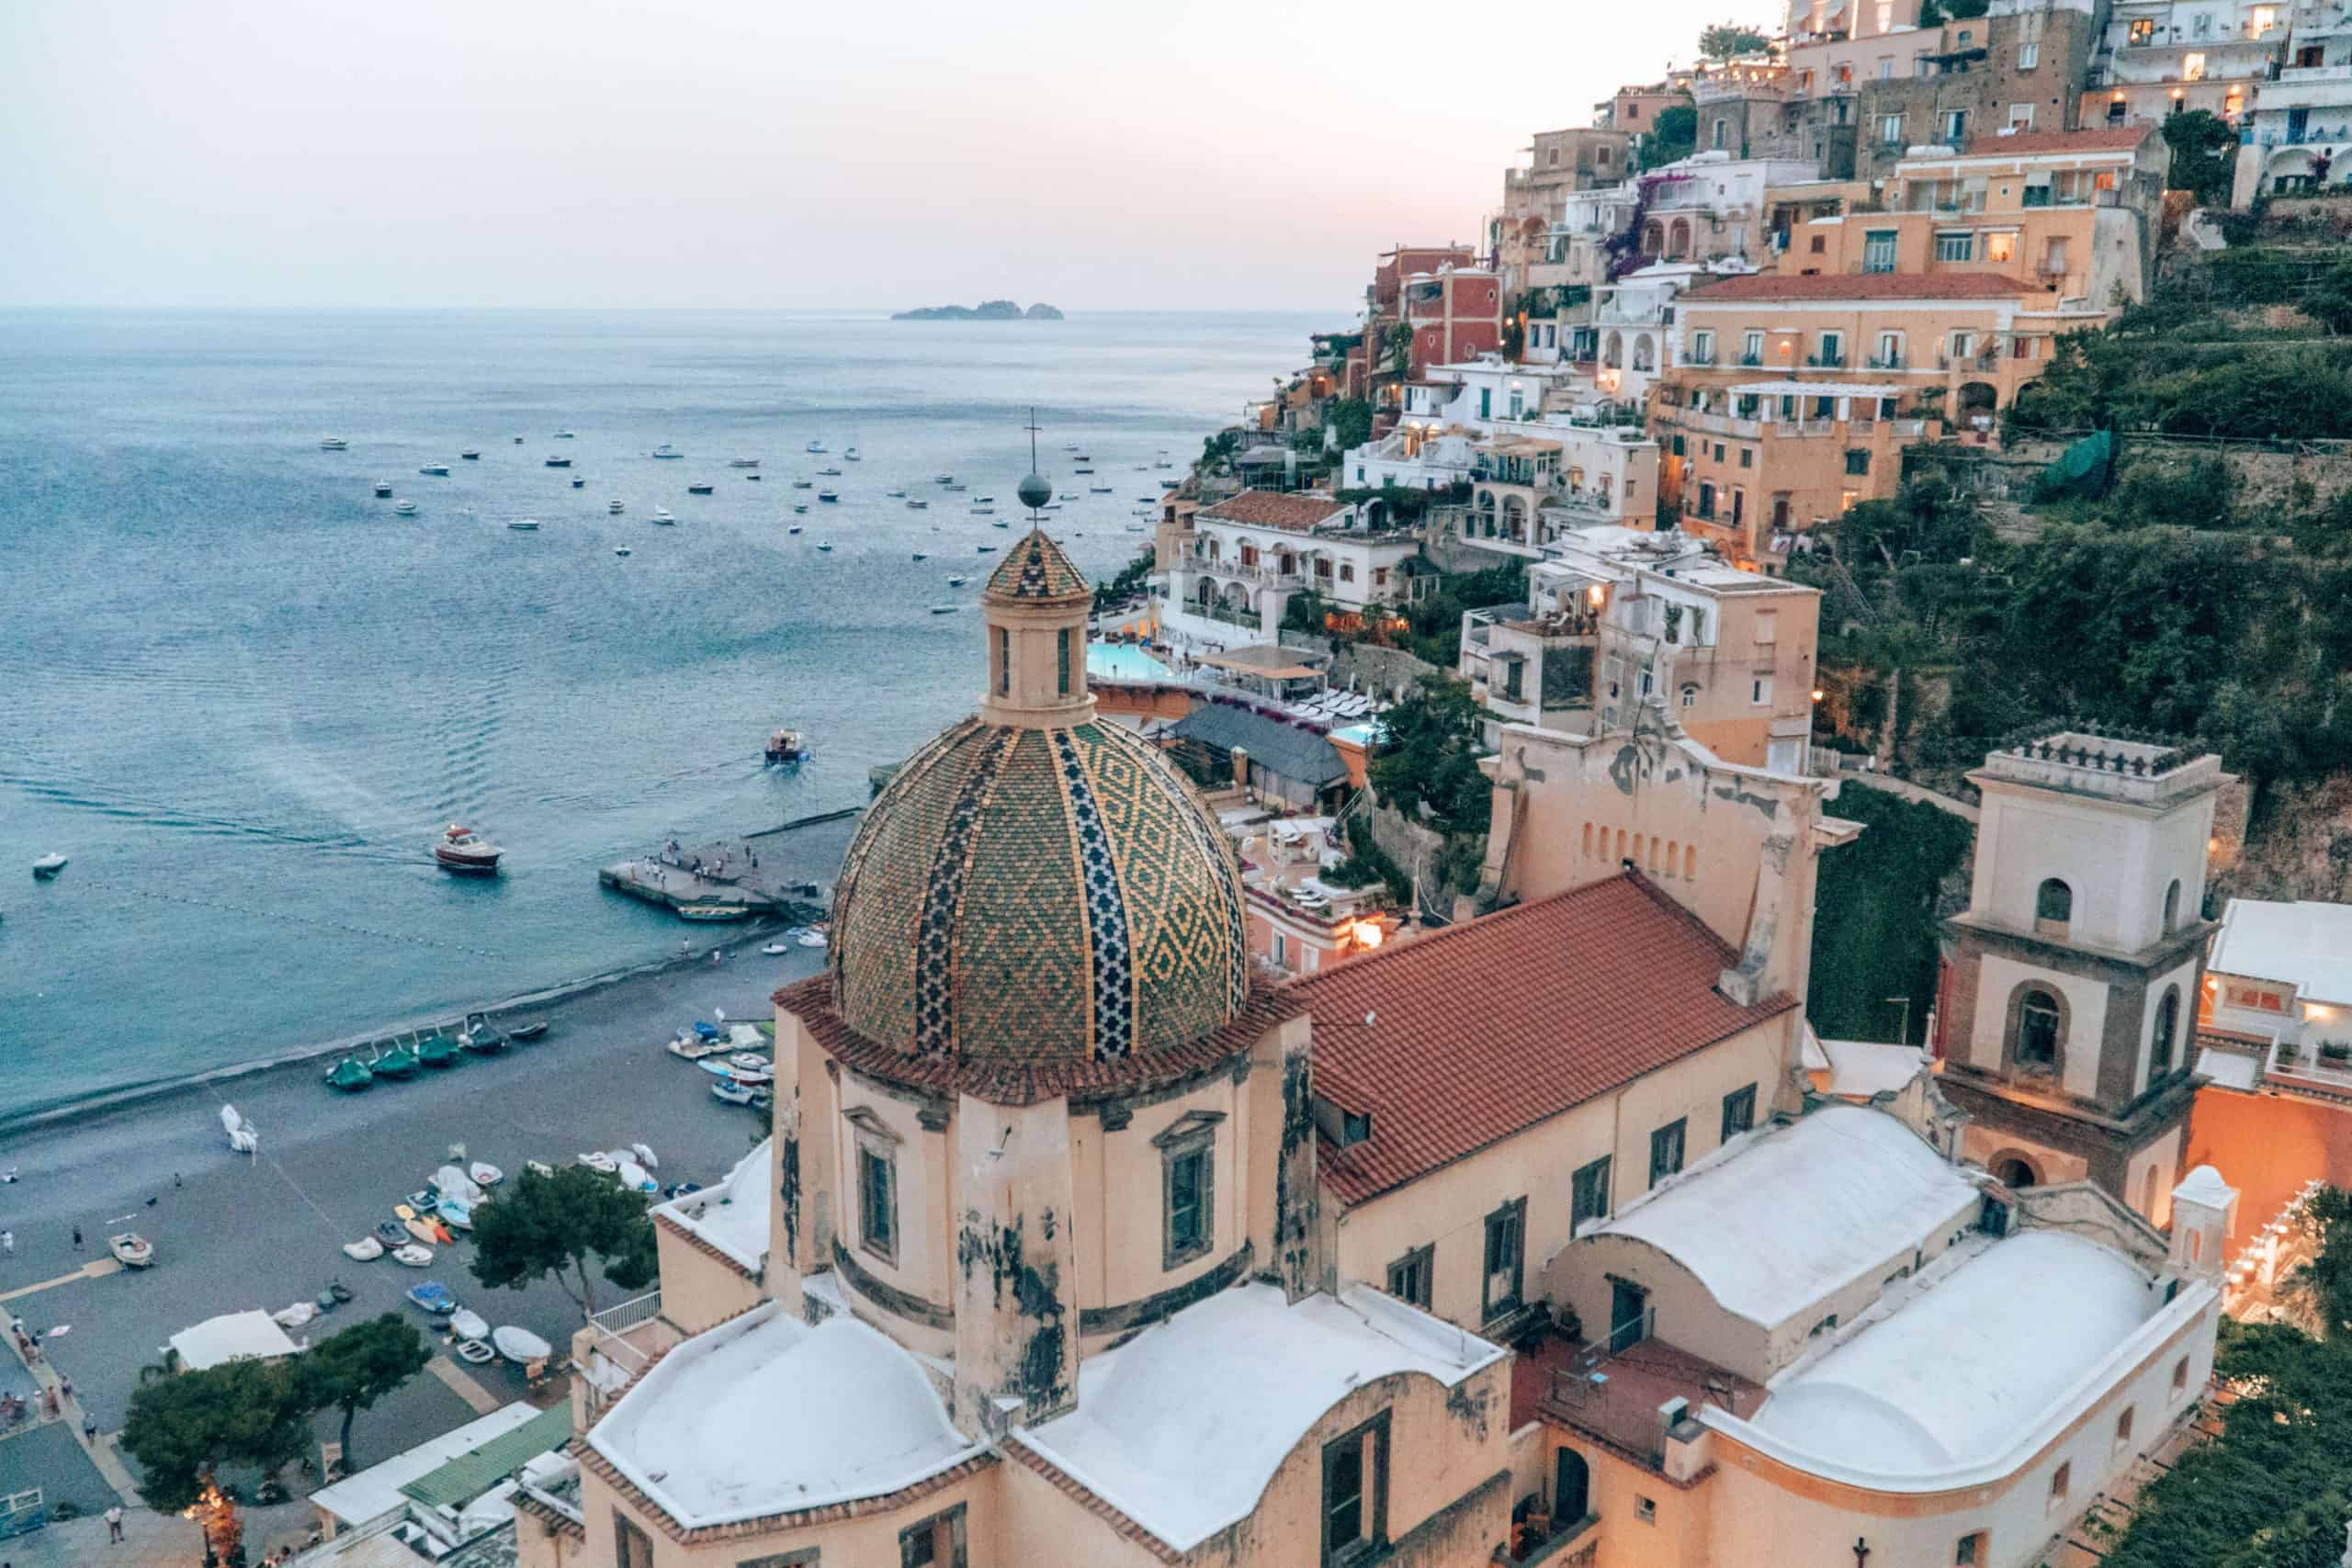 Taking in the views from La Sirenuse in Positano, Italy